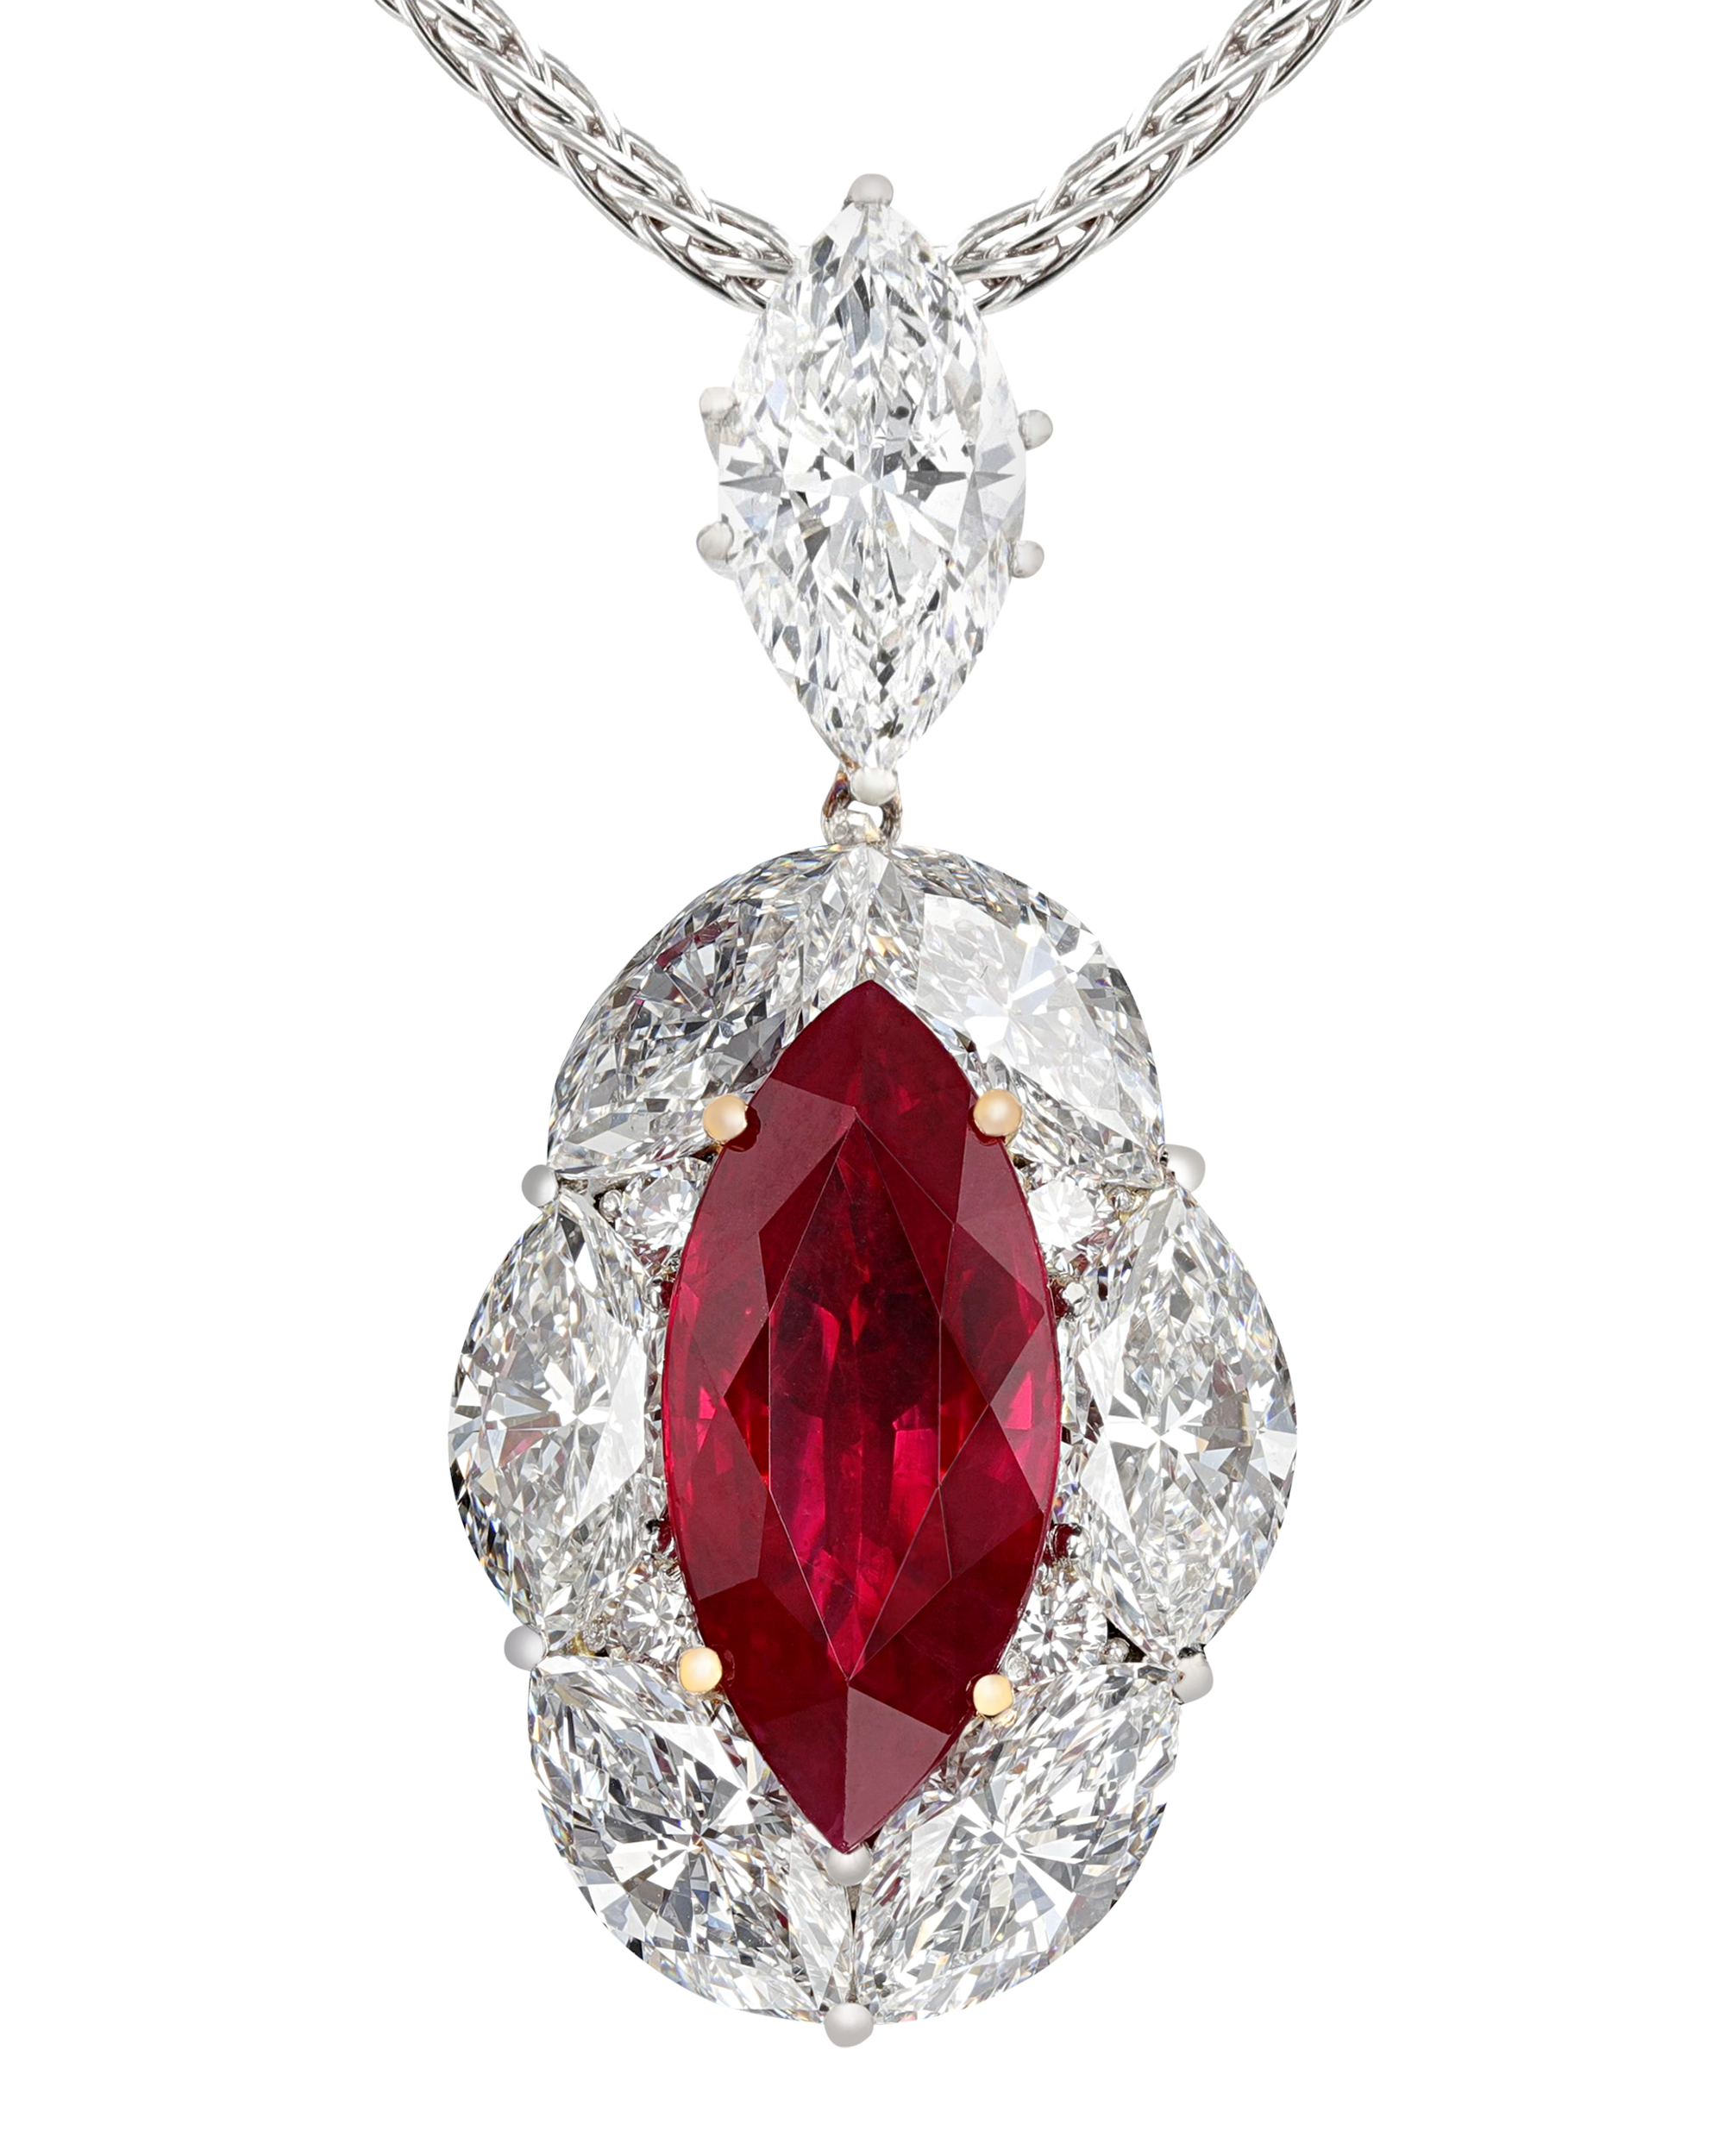 Marquise Burma Ruby Necklace, 5.04 Carats